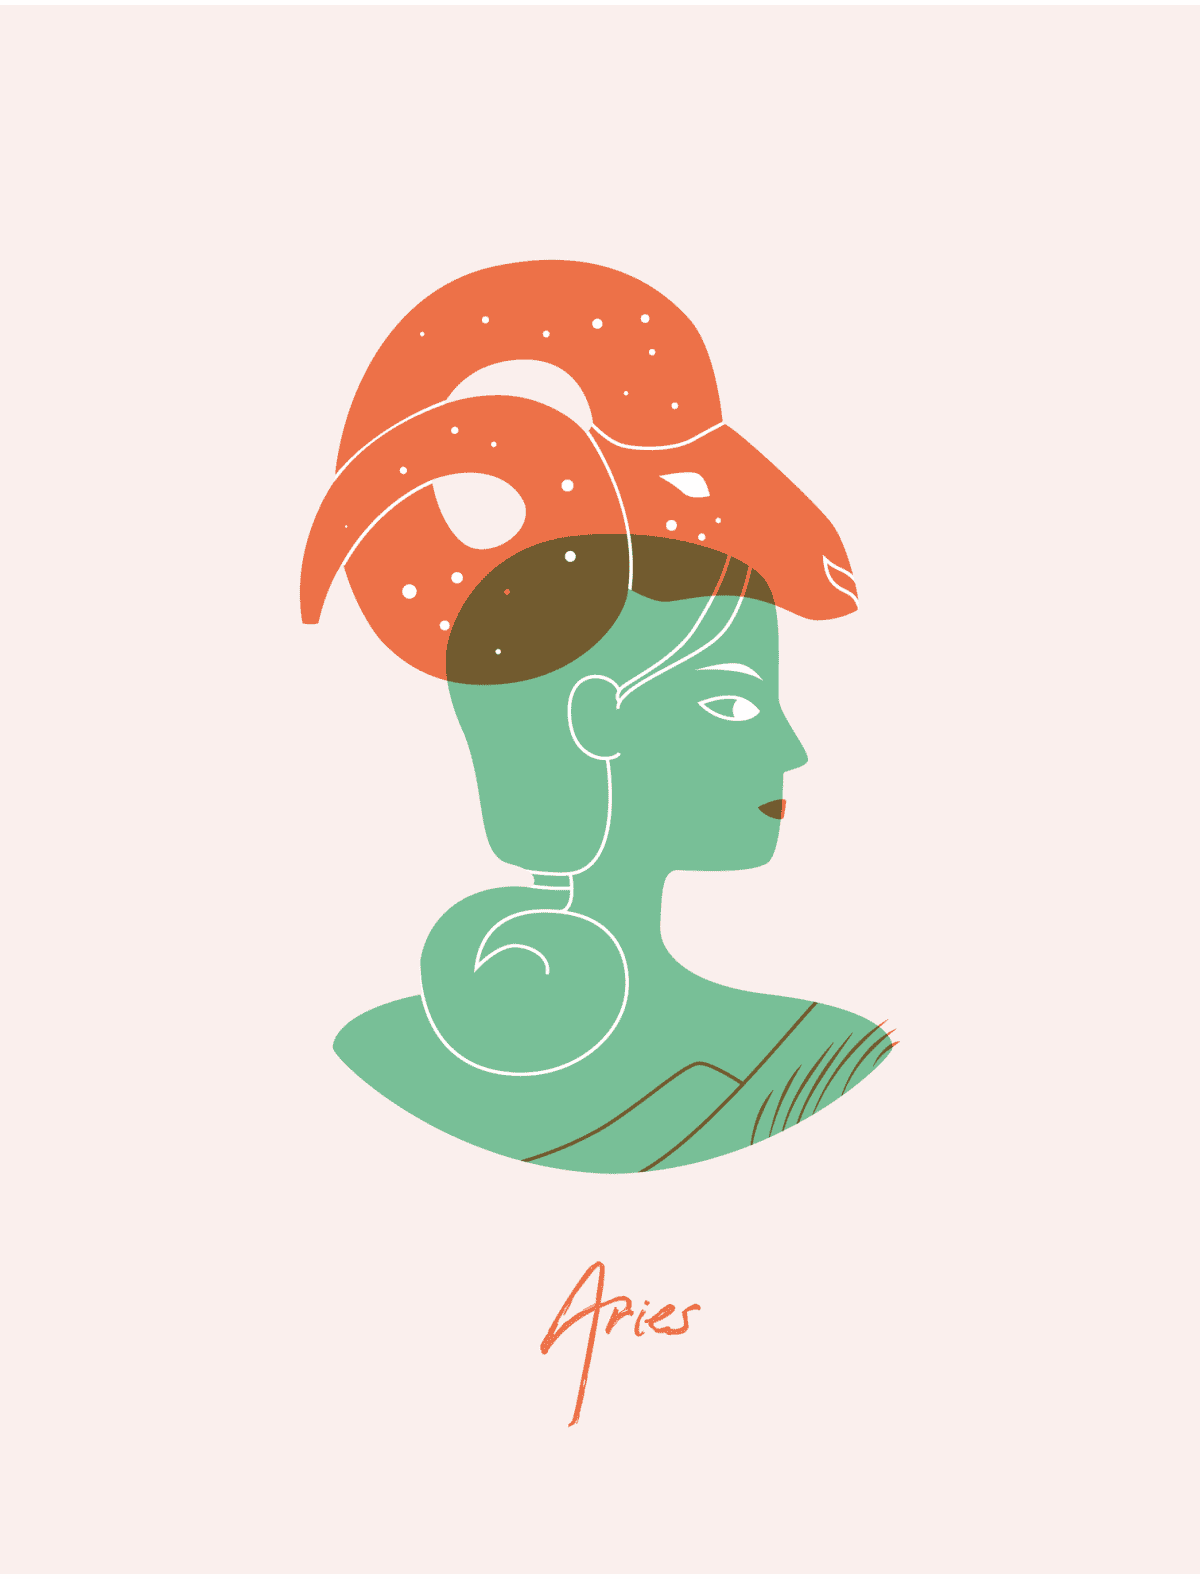 Drawing of the Aries astrological sign